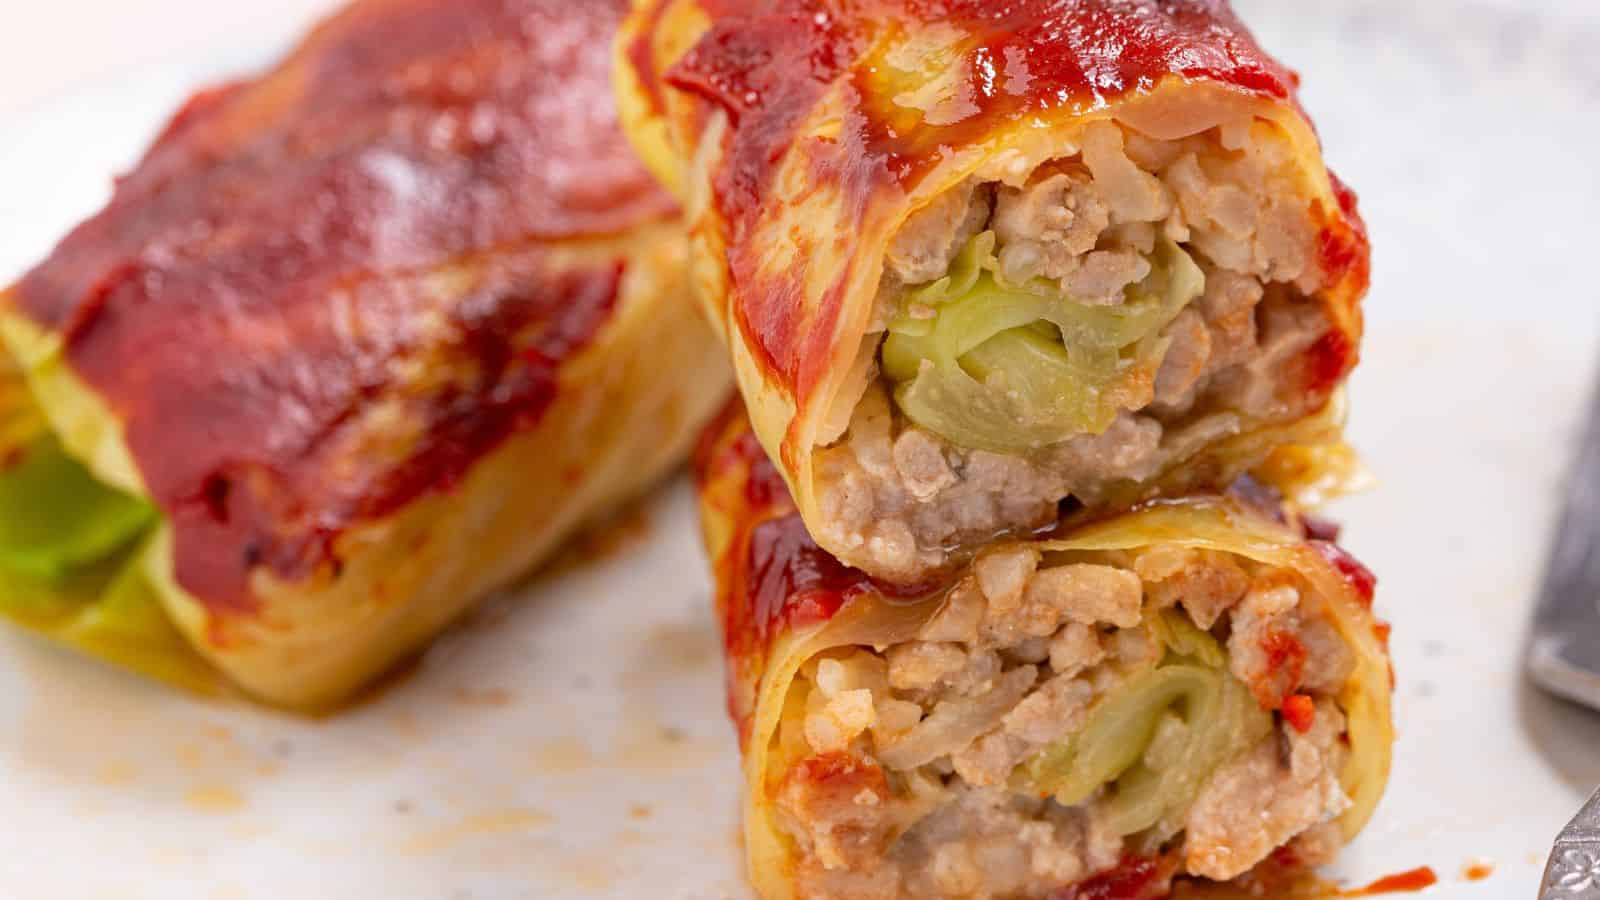 Two cabbage rolls on a plate with fork.